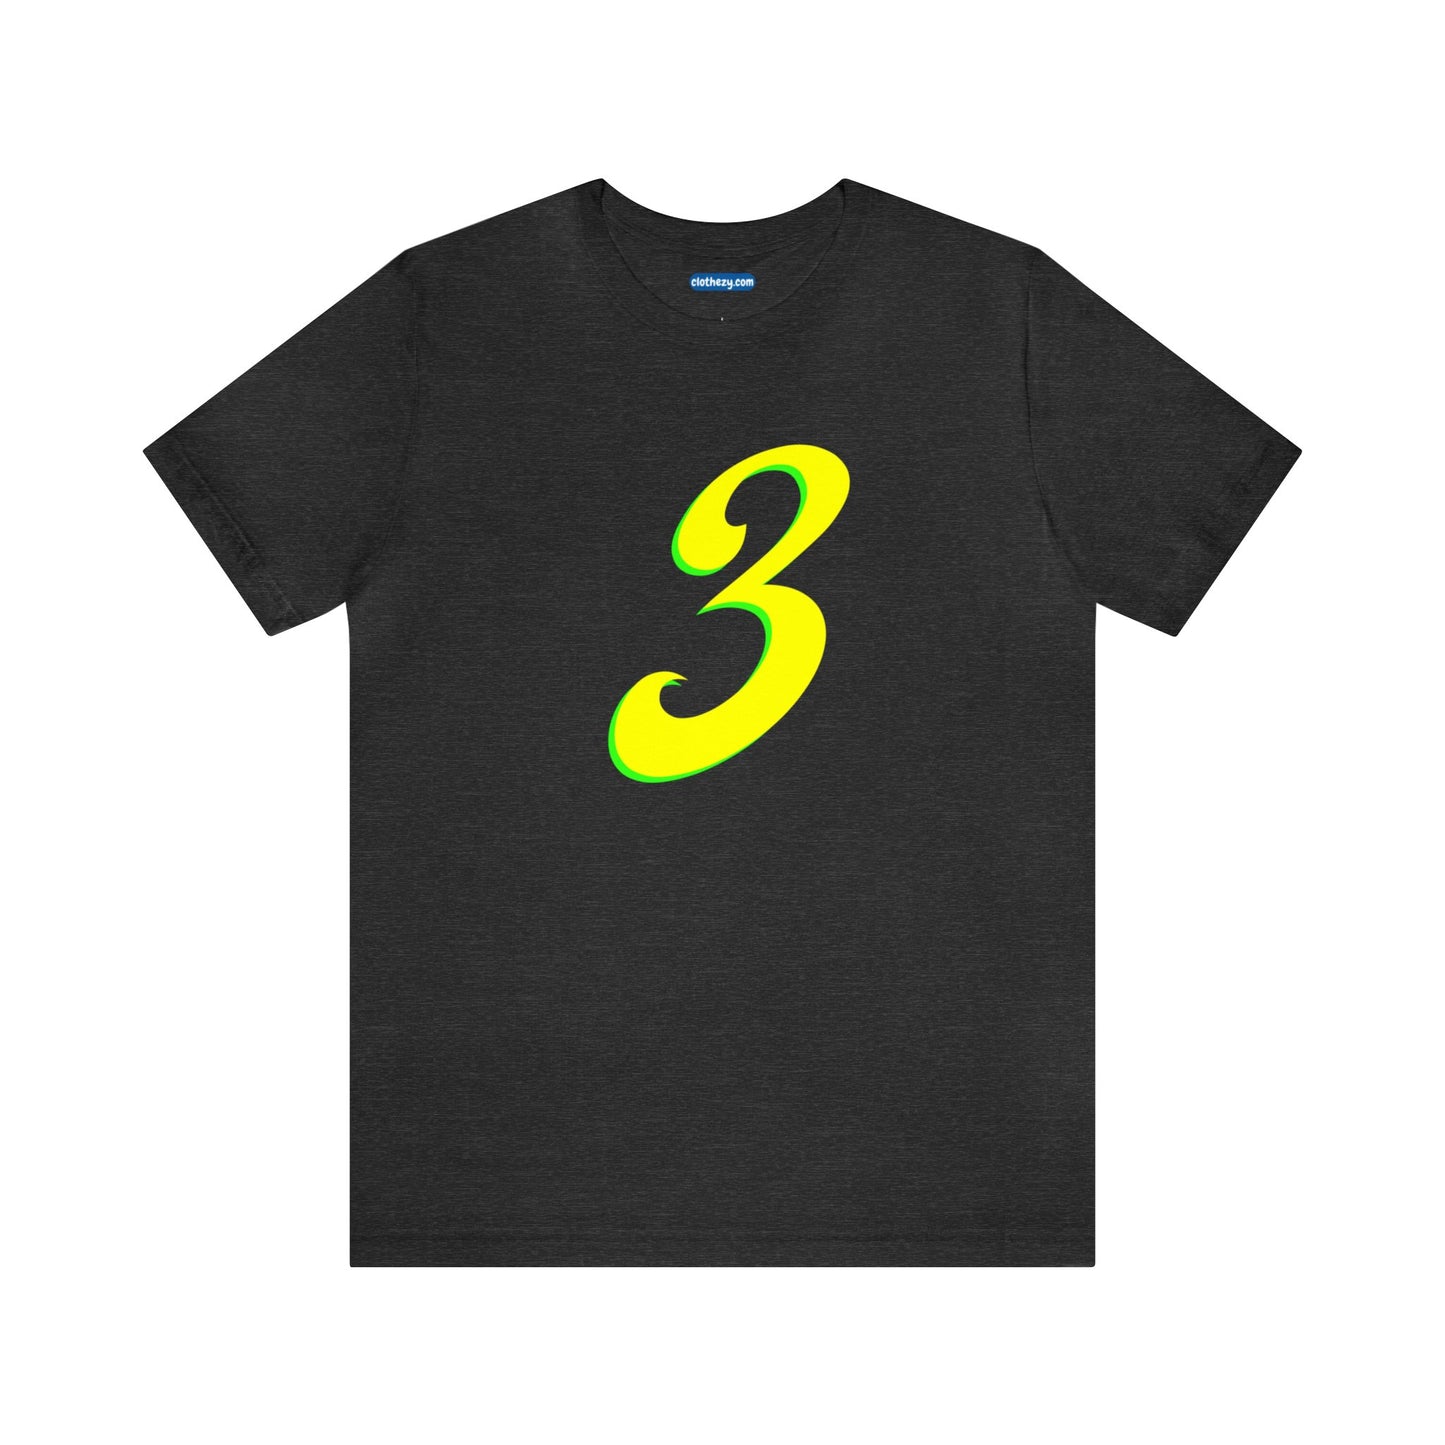 Number 3 Design - Soft Cotton Tee for birthdays and celebrations, Gift for friends and family, Multiple Options by clothezy.com in Gold Size Small - Buy Now